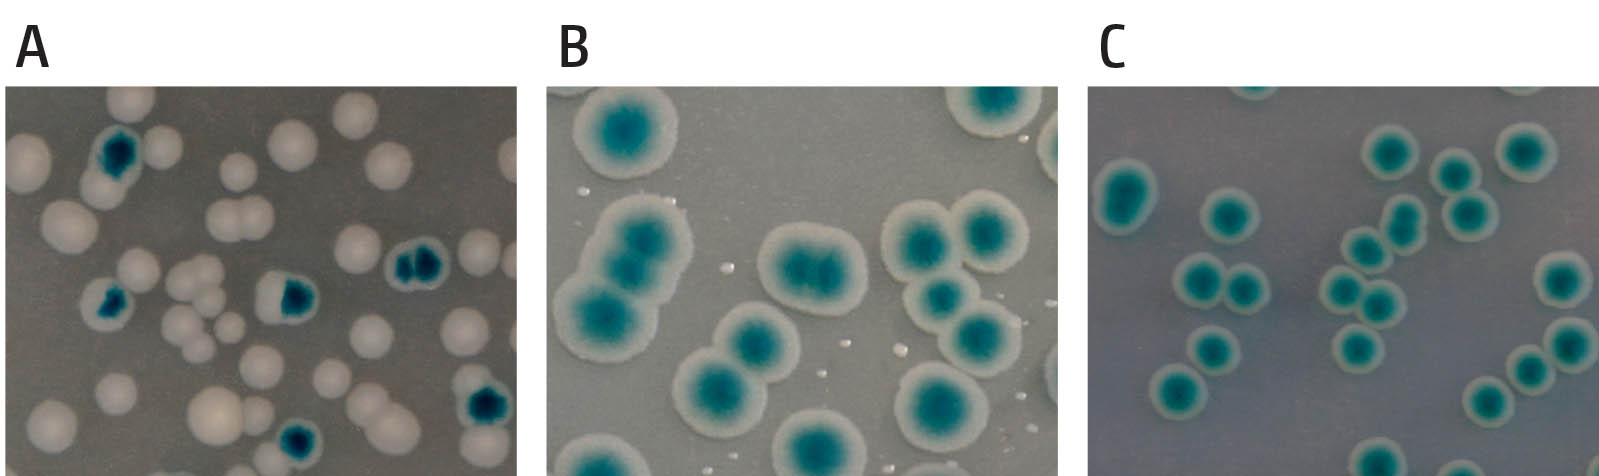 Example of the synthetic lethality screen. (A) shows cells in which the gene encoded on the pRC7 is not needed. Segregation of blue and white colonies is observed and blue colonies contain white sectors, demonstrating the rapid loss of the covering plasmid. (B) shows a synthetically sick interaction of two genes of interest. Cells contain a deletion of two genes, which renders the cells sick and very slow growing. Cells retaining the covering plasmid show rapid growth into unsectored blue colonies, as one of the two deletions is masked, while cells having lost the plasmid show very small white colonies, demonstrating that they are viable but very slow growing. (C) shows a synthetically lethal interaction of a deletion of two genes. Cells which have lost the covering plasmid are entirely unable to grow and no white colonies are observed, while cells retaining the covering plasmid grow into unsectored blue colonies.